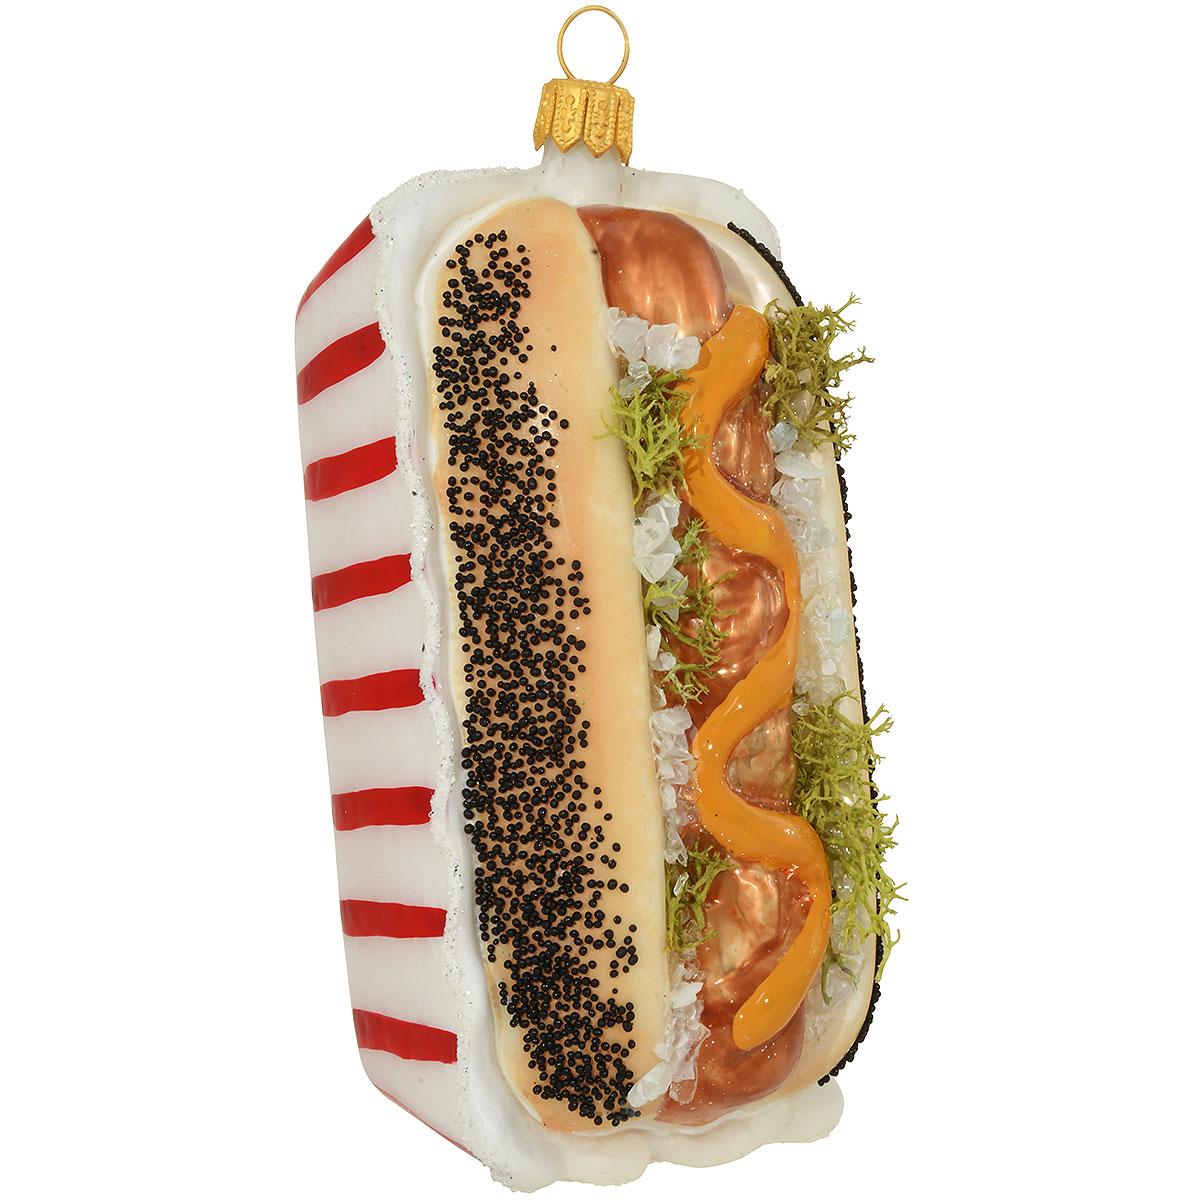 Hot Dog In Wrapper Glass Ornament